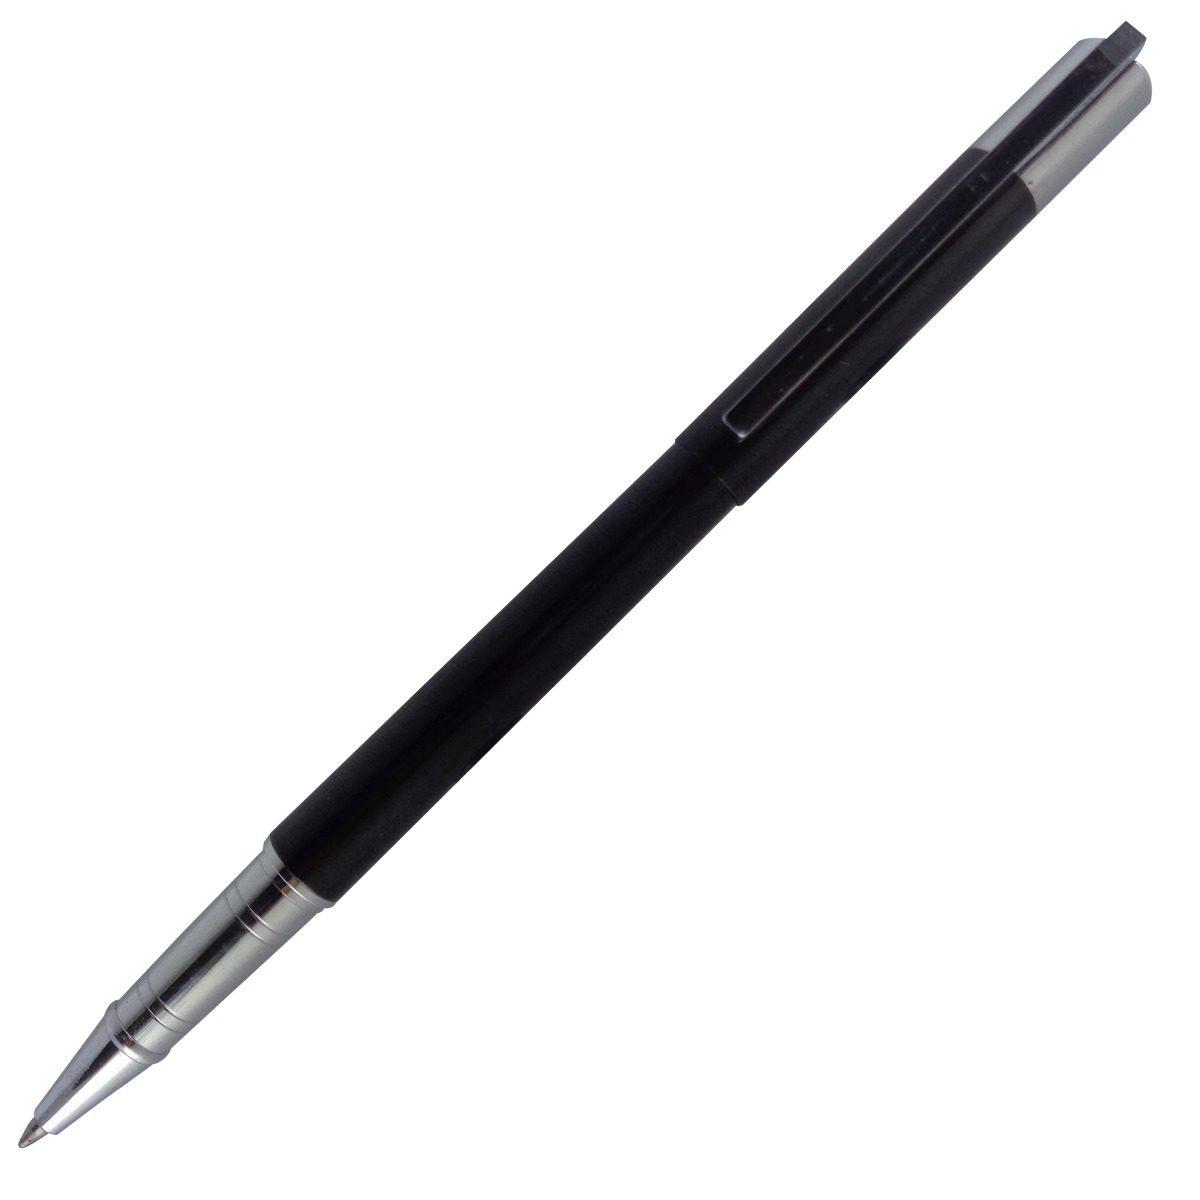 They Are Cross Compatible 8513 12 x Pen Refills in Black Ink 0.7mm Point By NEO+ 